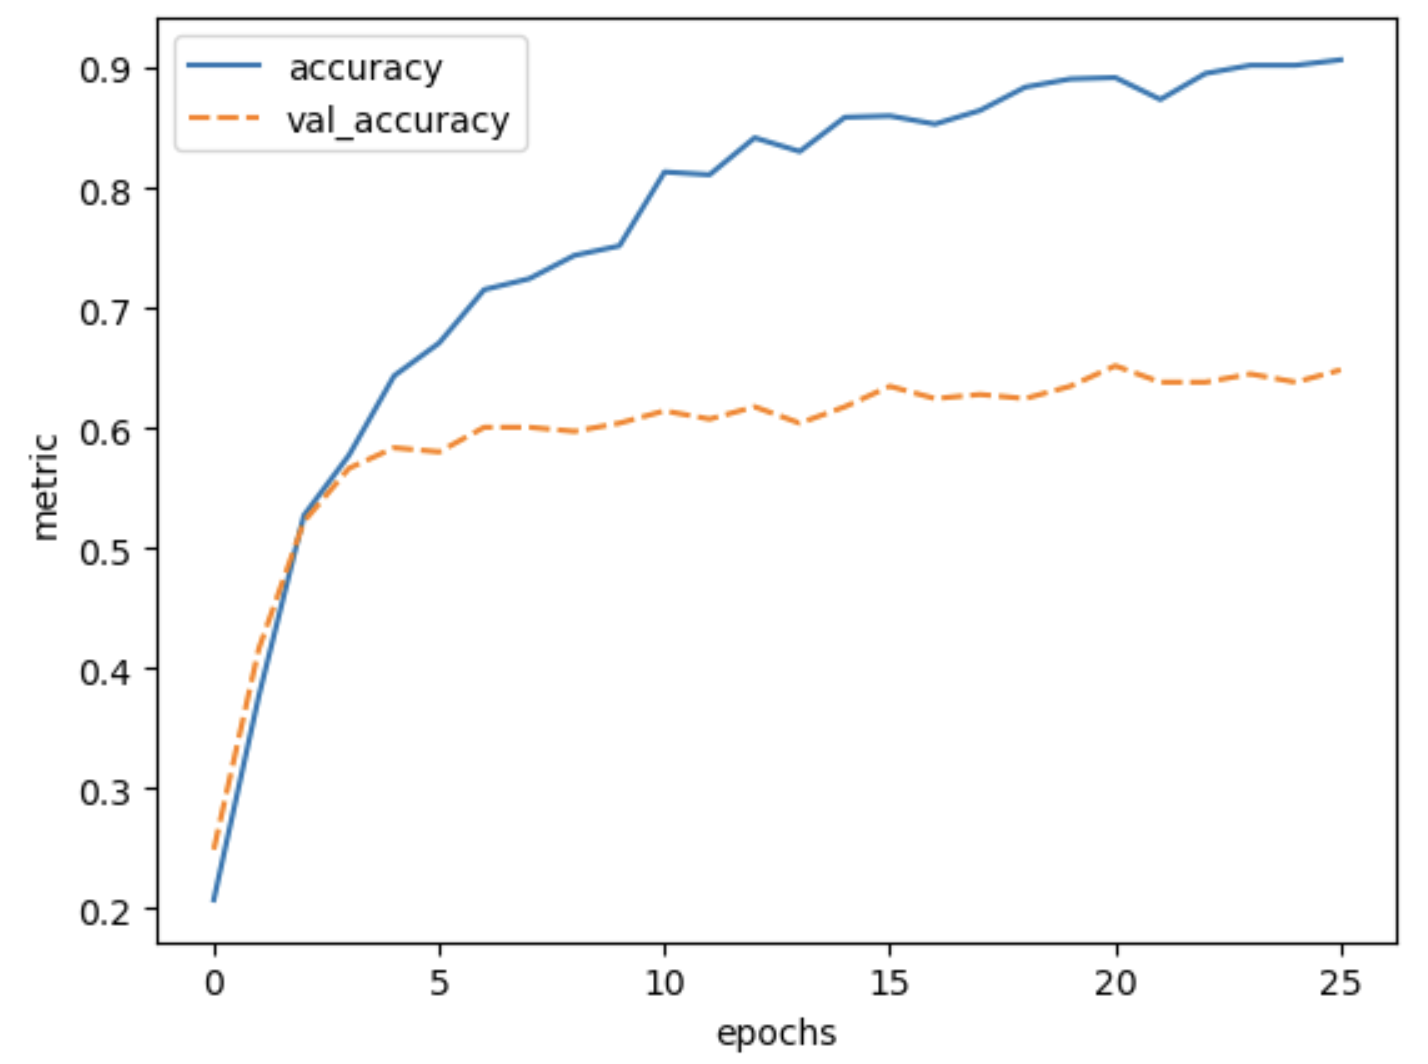 Training history for training the pre-trained-model. The training accuracy slowly raises from 0.2 to 0.9 in 20 epochs. The validation accuracy starts higher at 0.25, but reaches a plateau around 0.64